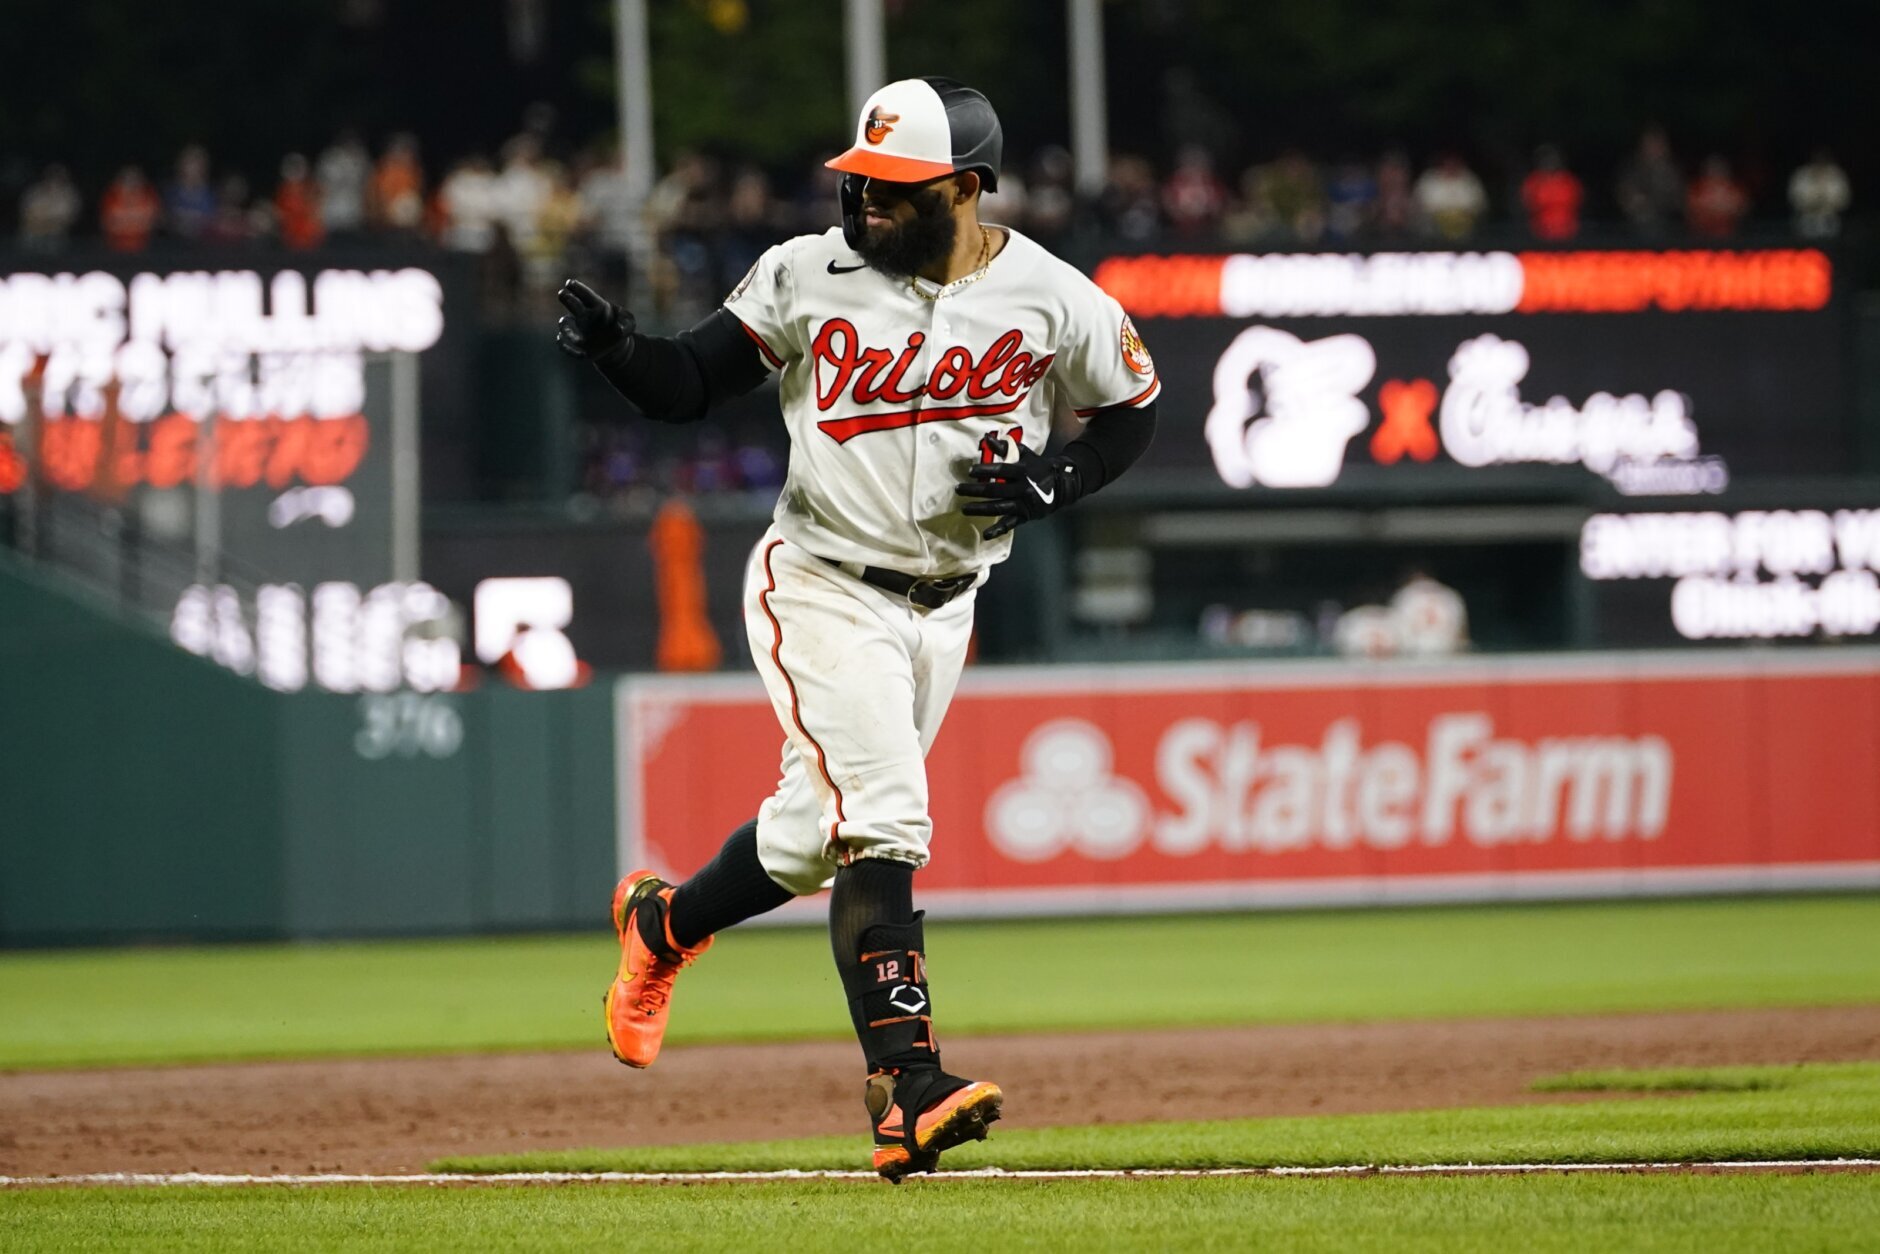 Orioles outlast Rangers ace to manufacture a gutsy team win and series  sweep in Texas, 6-3 - Camden Chat